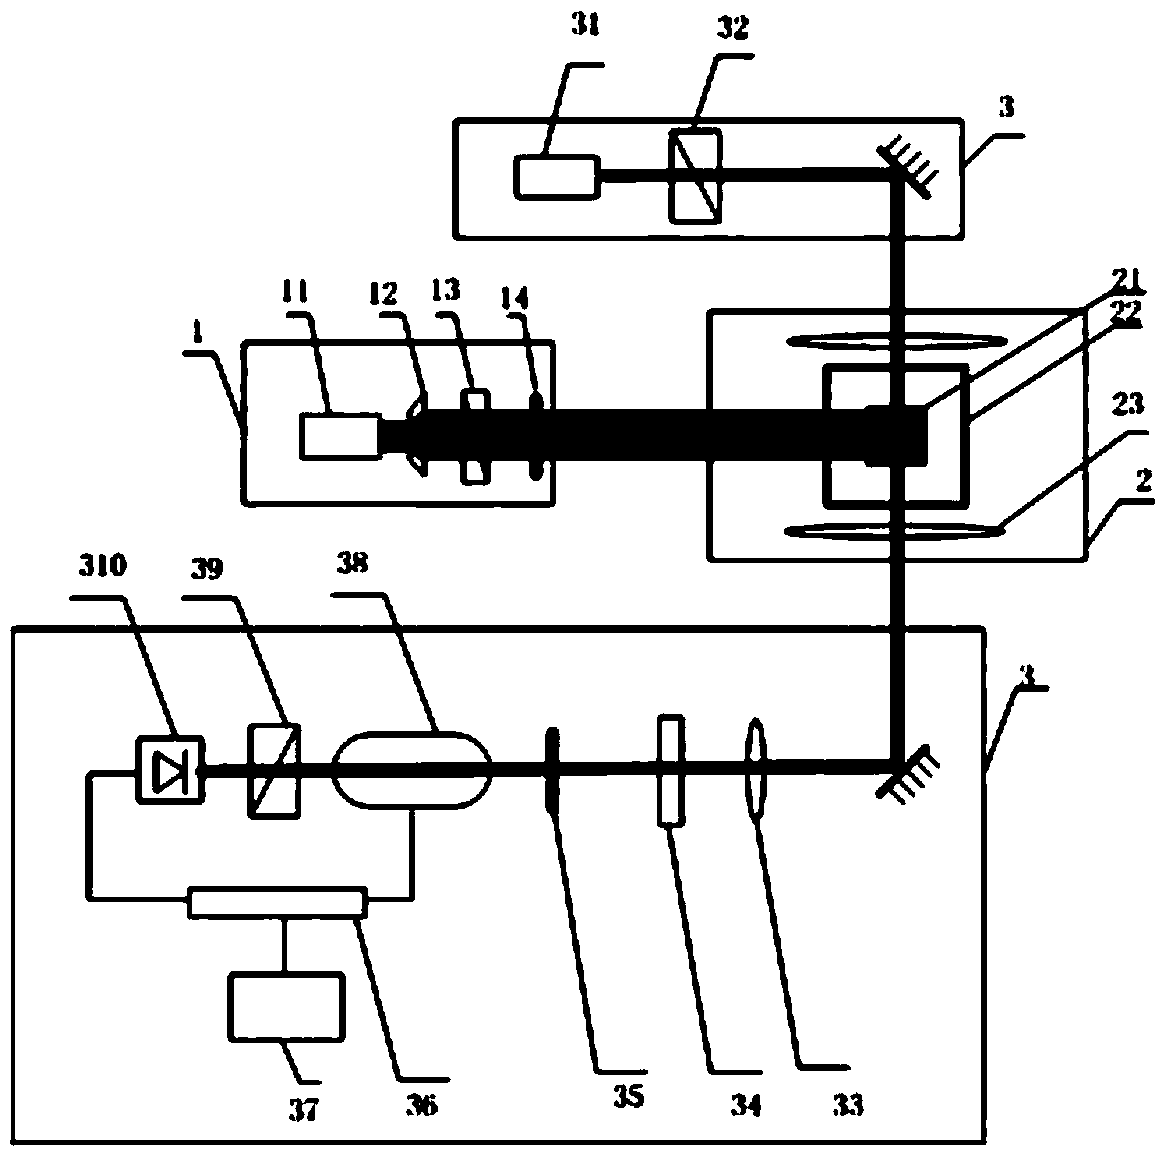 Integrated measurement device for atomic density and polarizability of alkali metal vapor